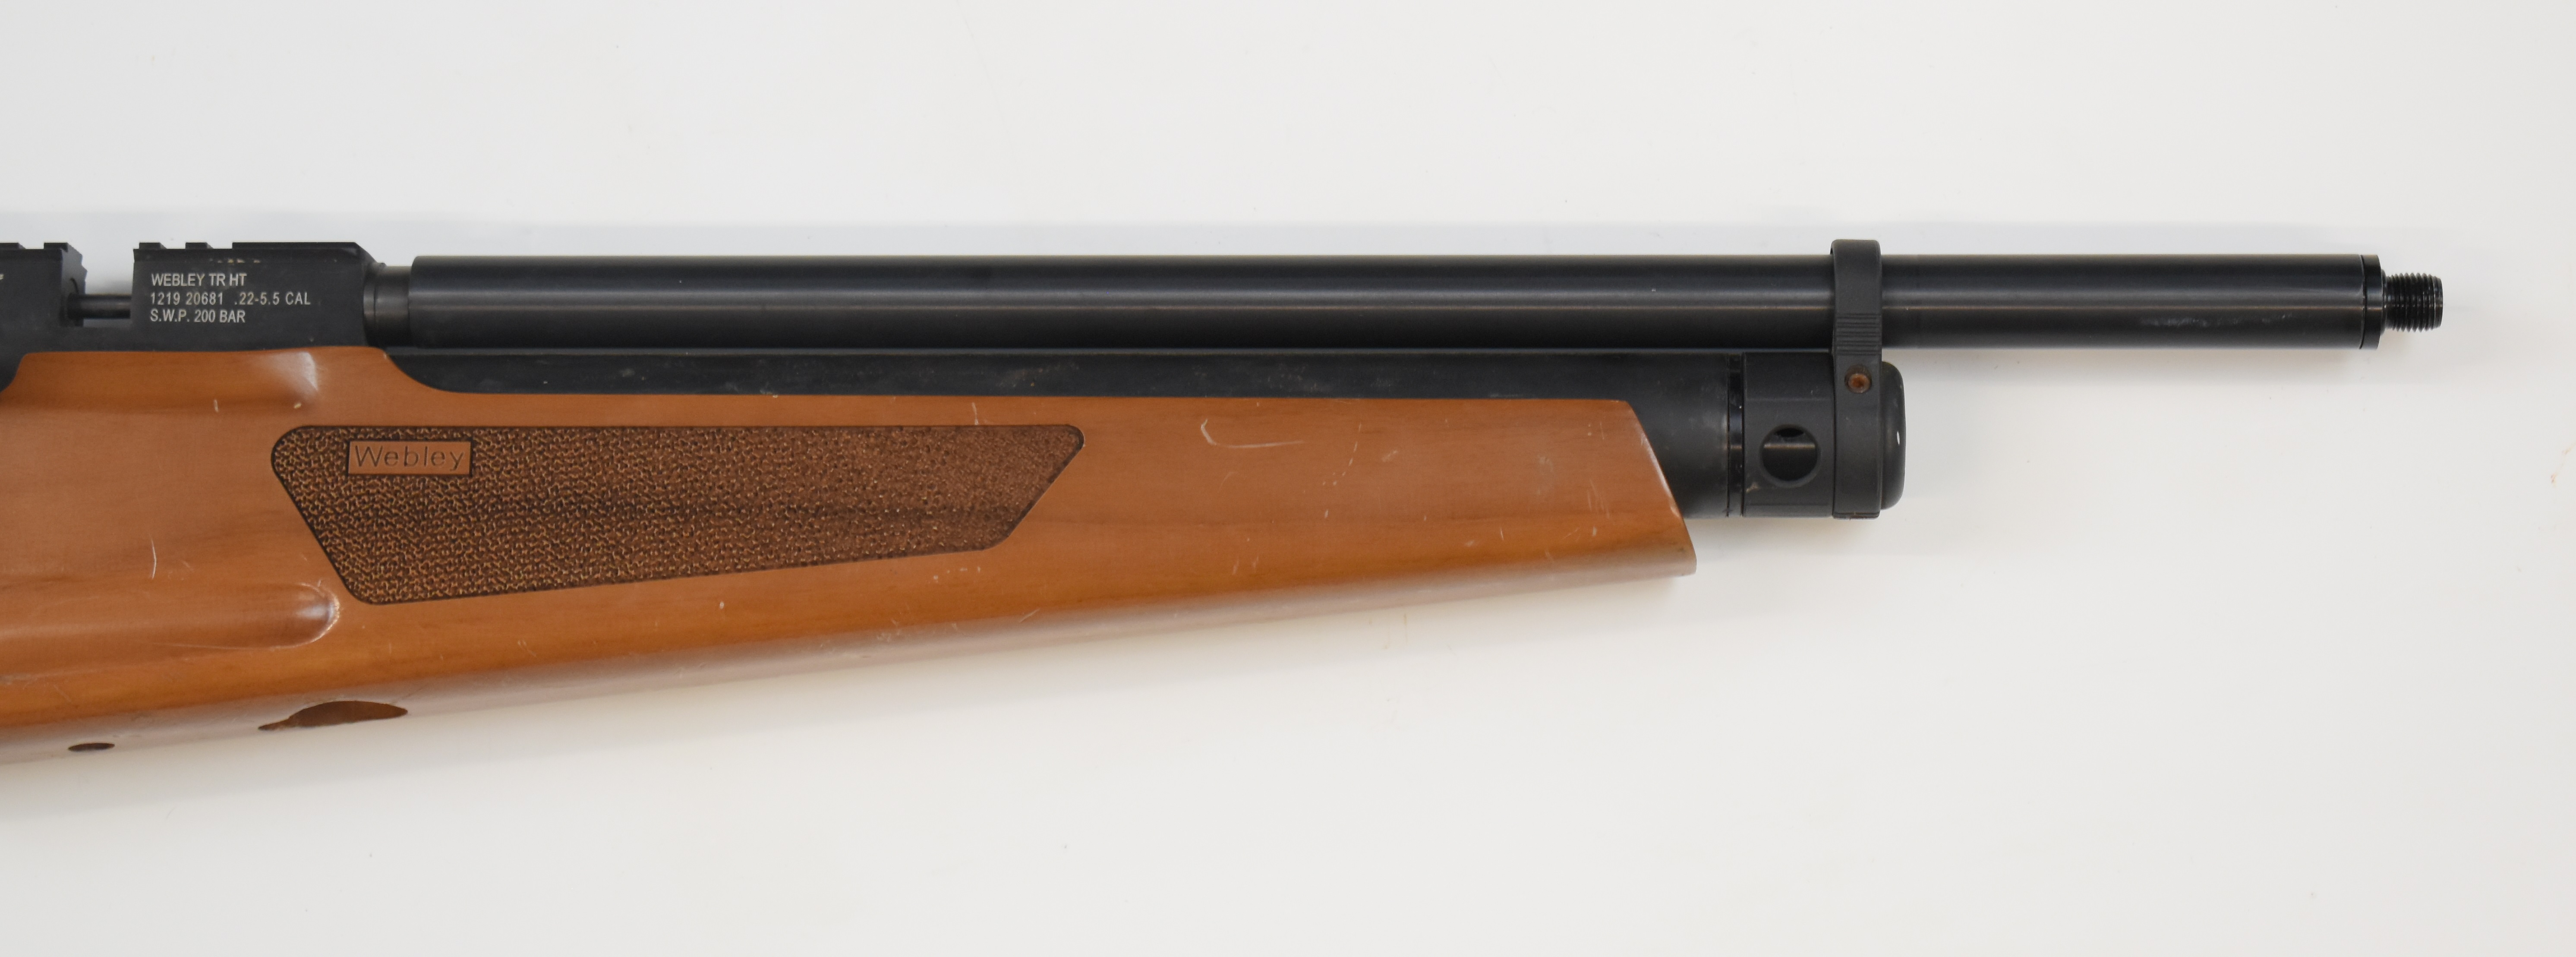 Webley Raider Classic .22 PCP air rifle with textured semi-pistol grip and forend, raised cheek - Image 5 of 10